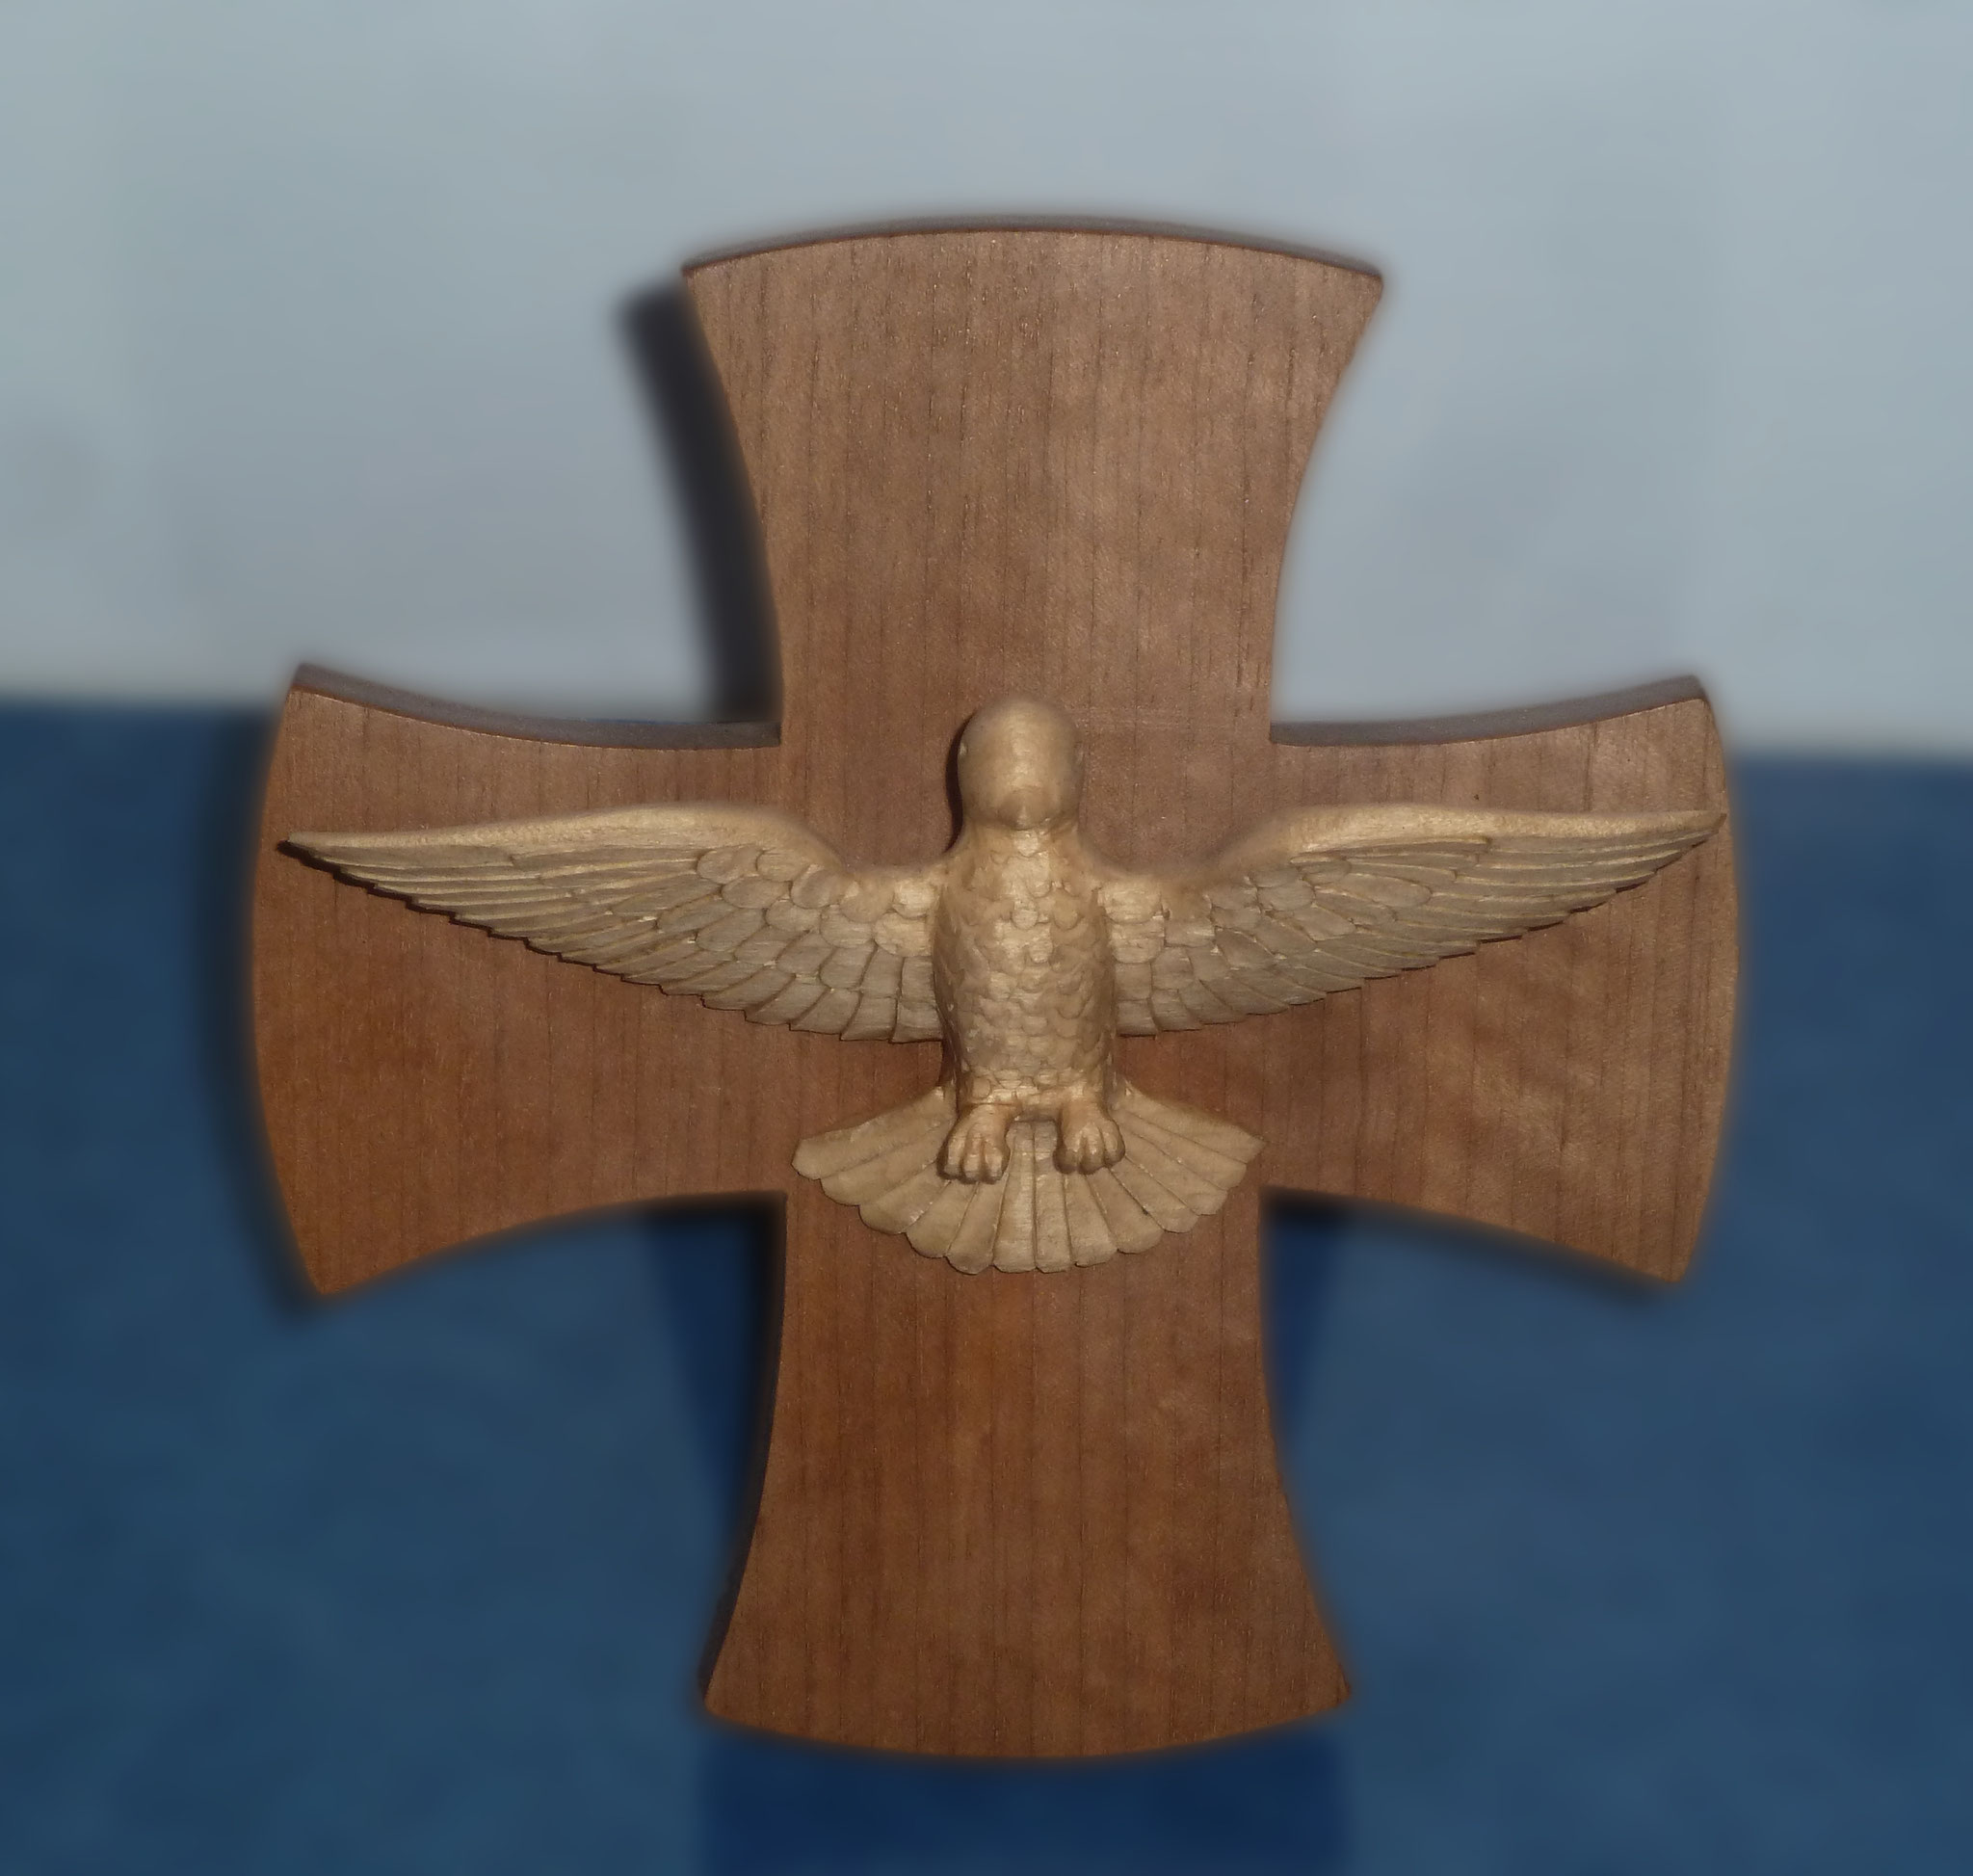 Confirmation (15cm, walnut and linden) - Confirmation